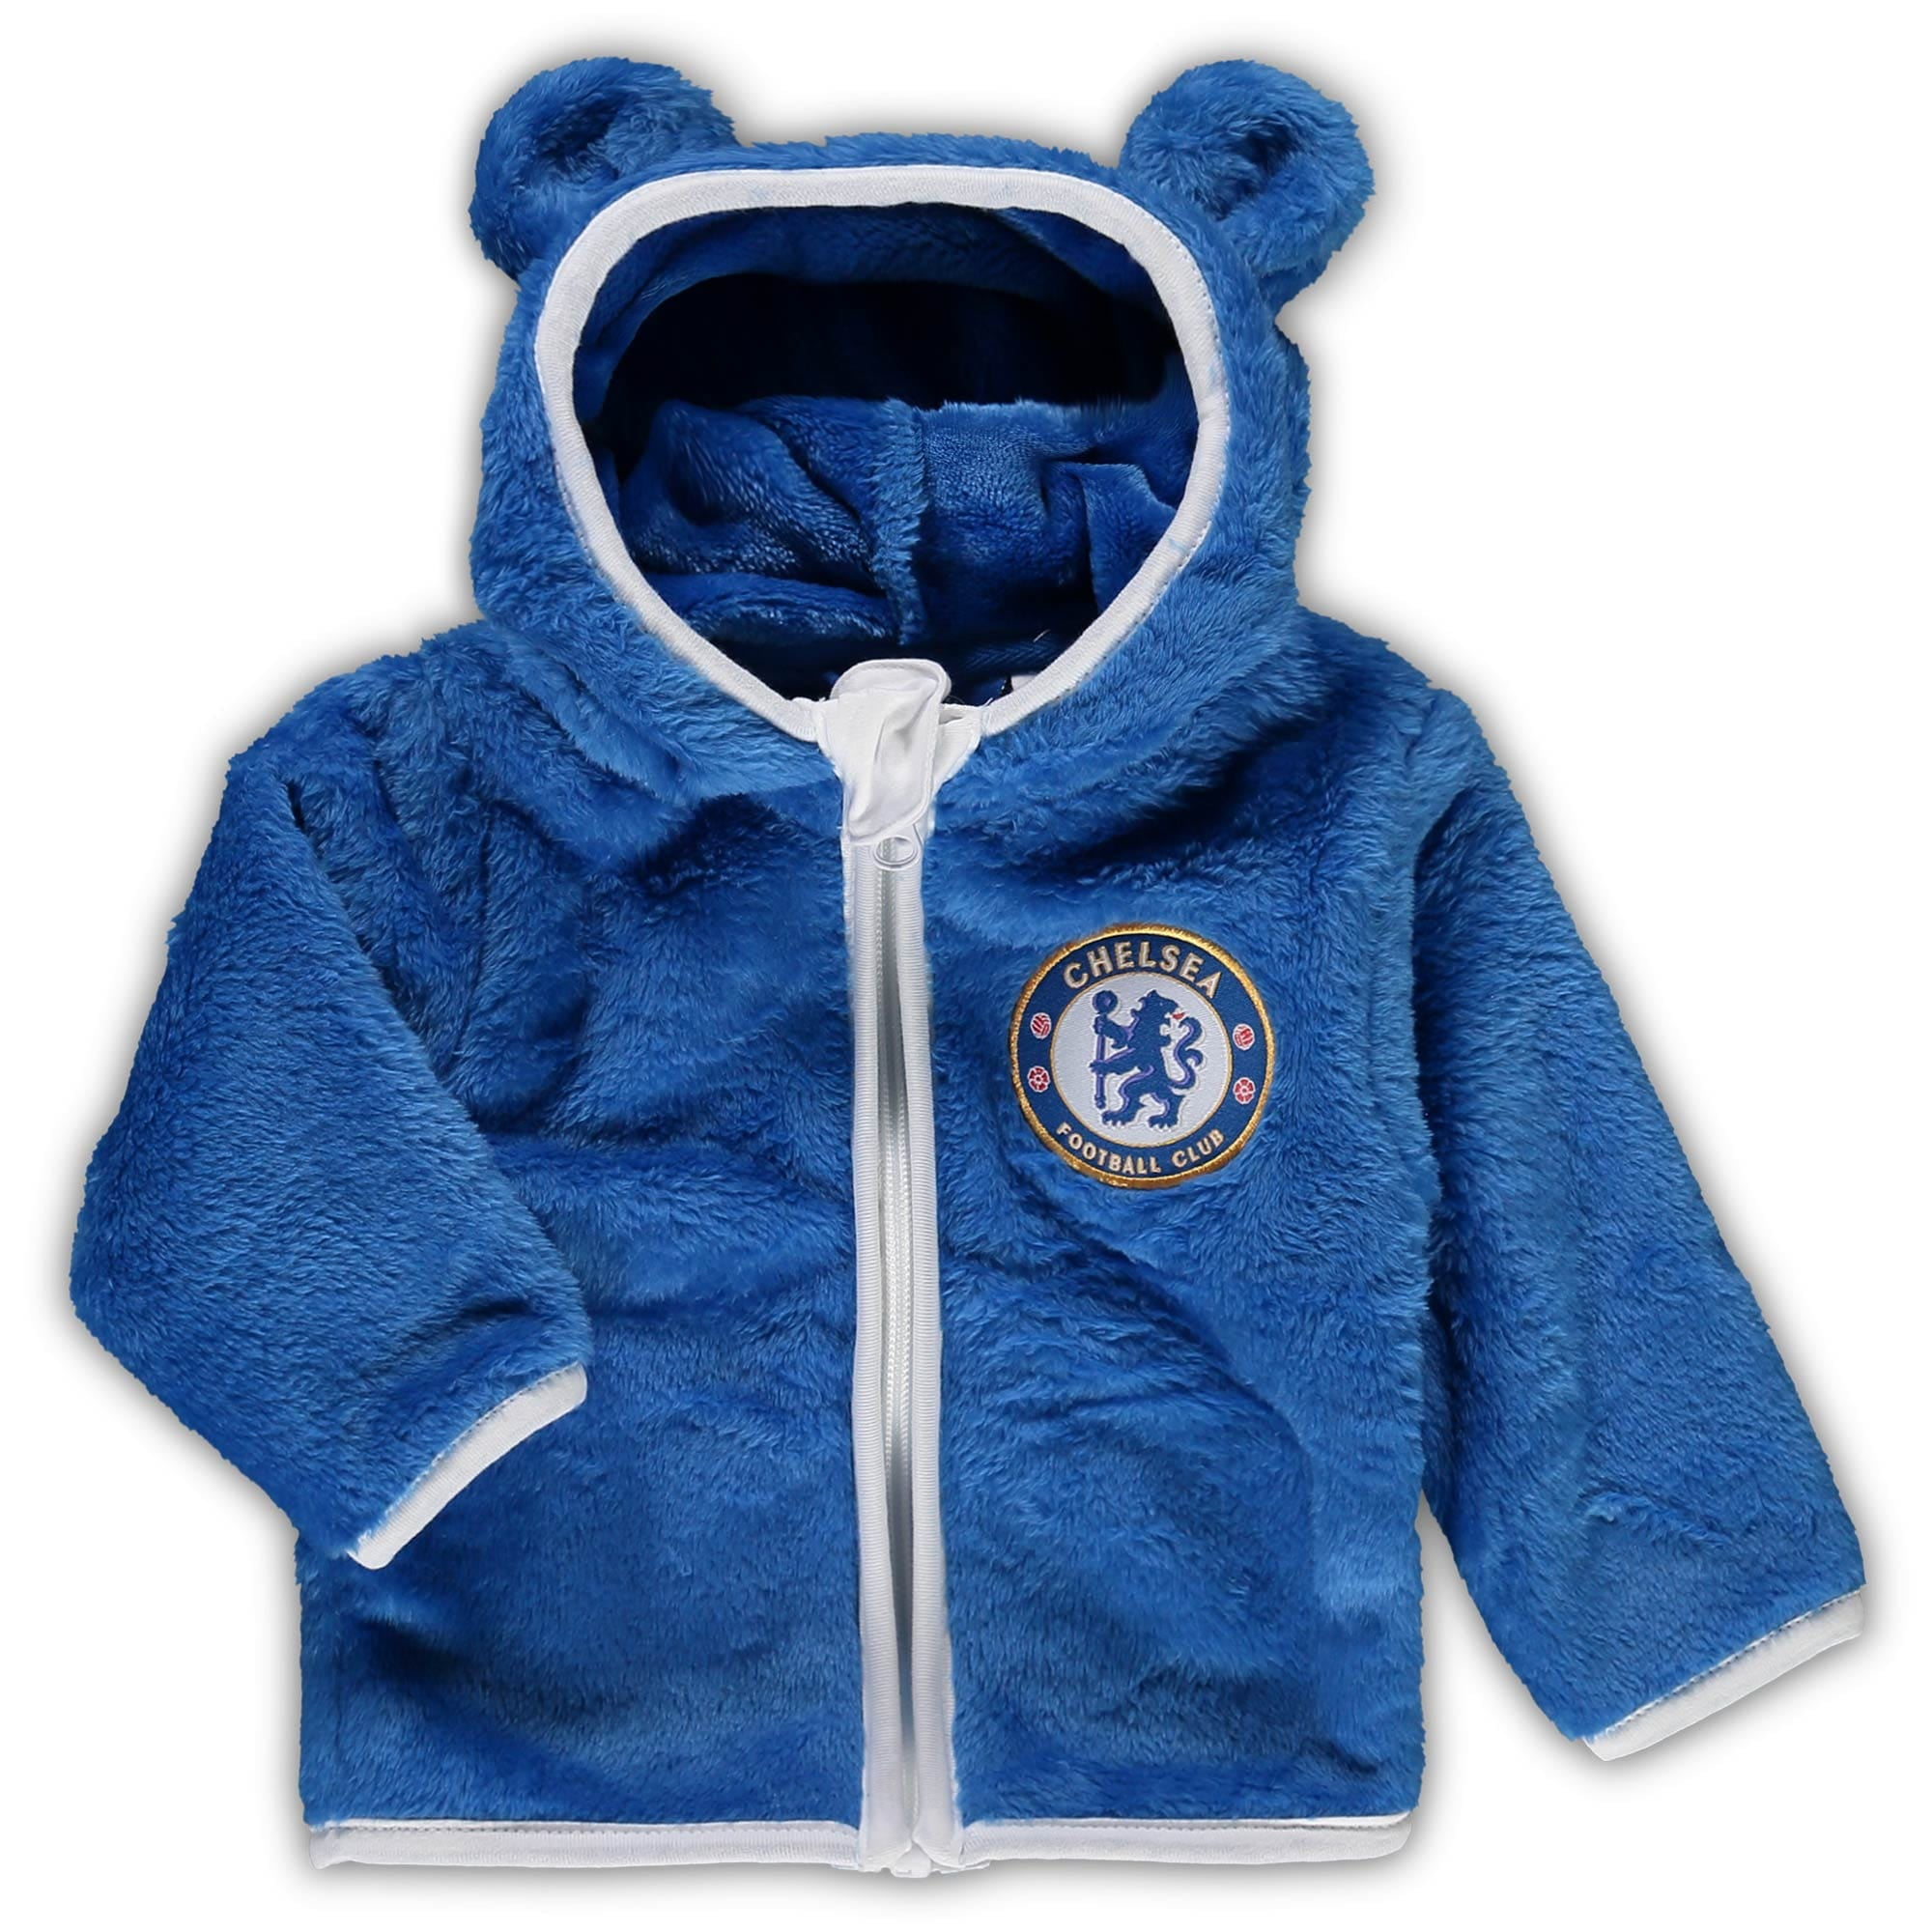 Boy's official licenced chelsea football club one piece fleece gift jump suit 